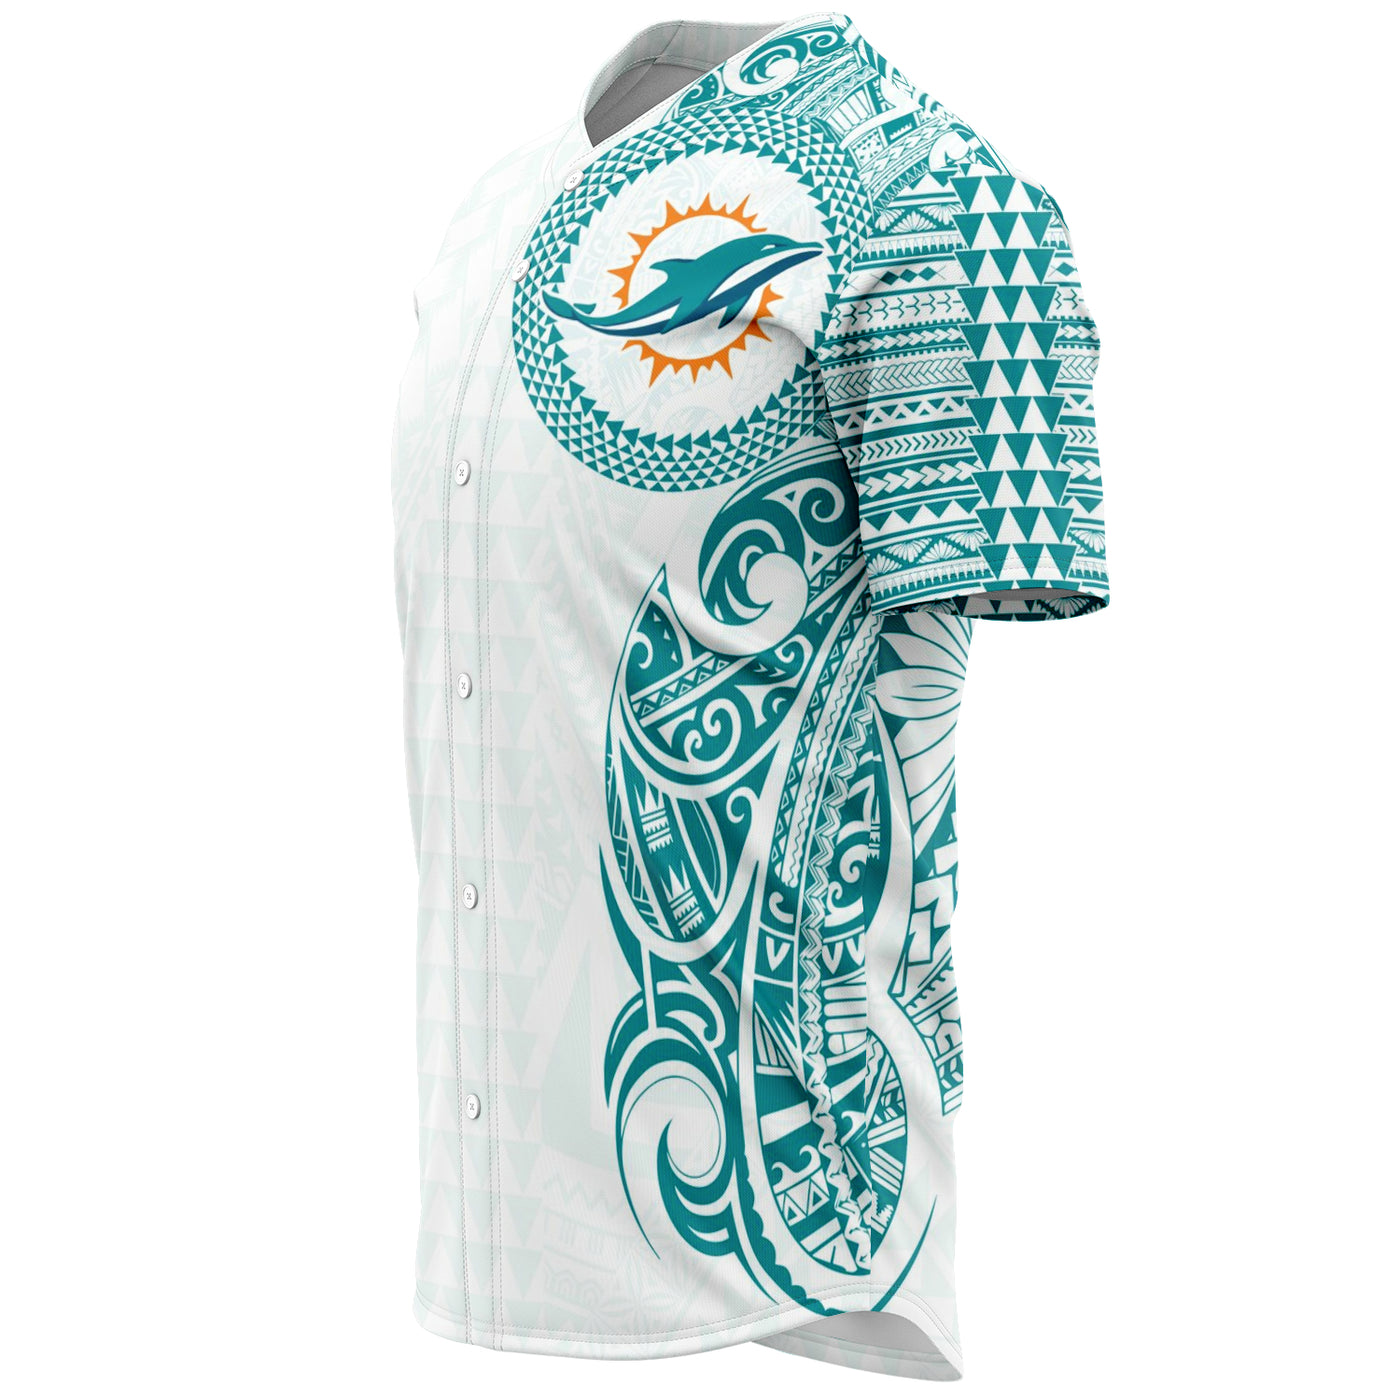 Customized Miami Dolphins Baseball Jersey Shirt in 2023